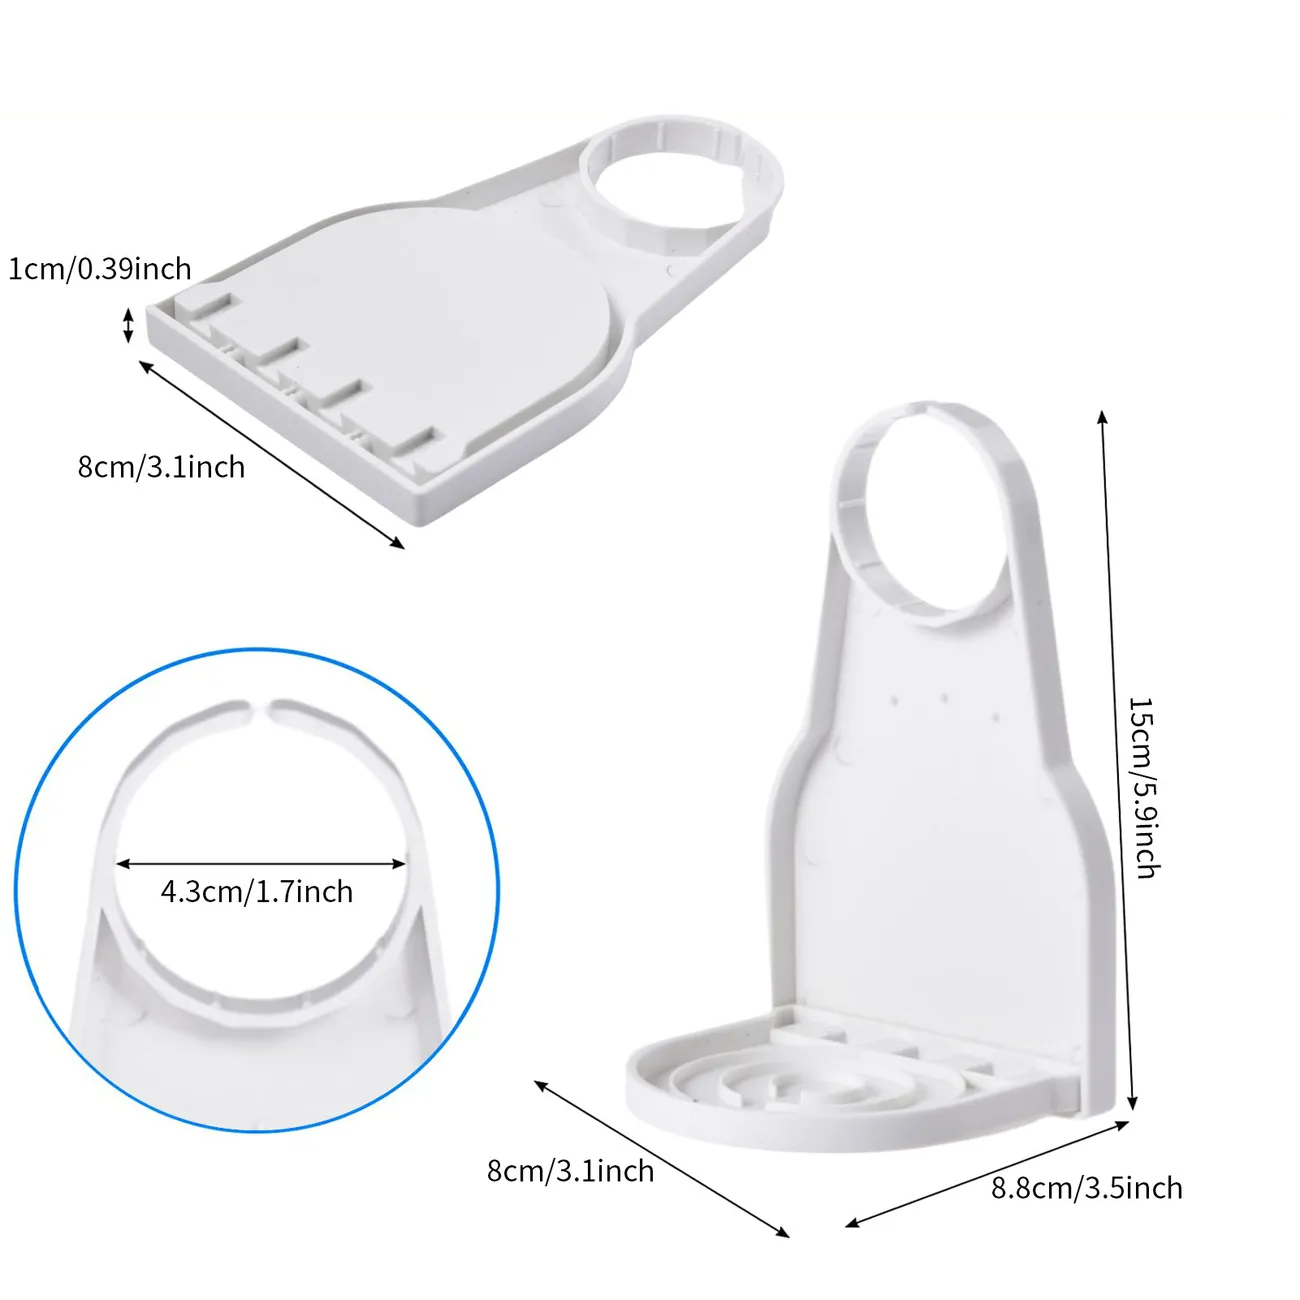 Laundry Detergent Cup Holder, Drip Tray Catcher for Laundry Fabric  Softener, No More Mess and Drips Only د.ب.‏ 1.50 بات بات Mobile